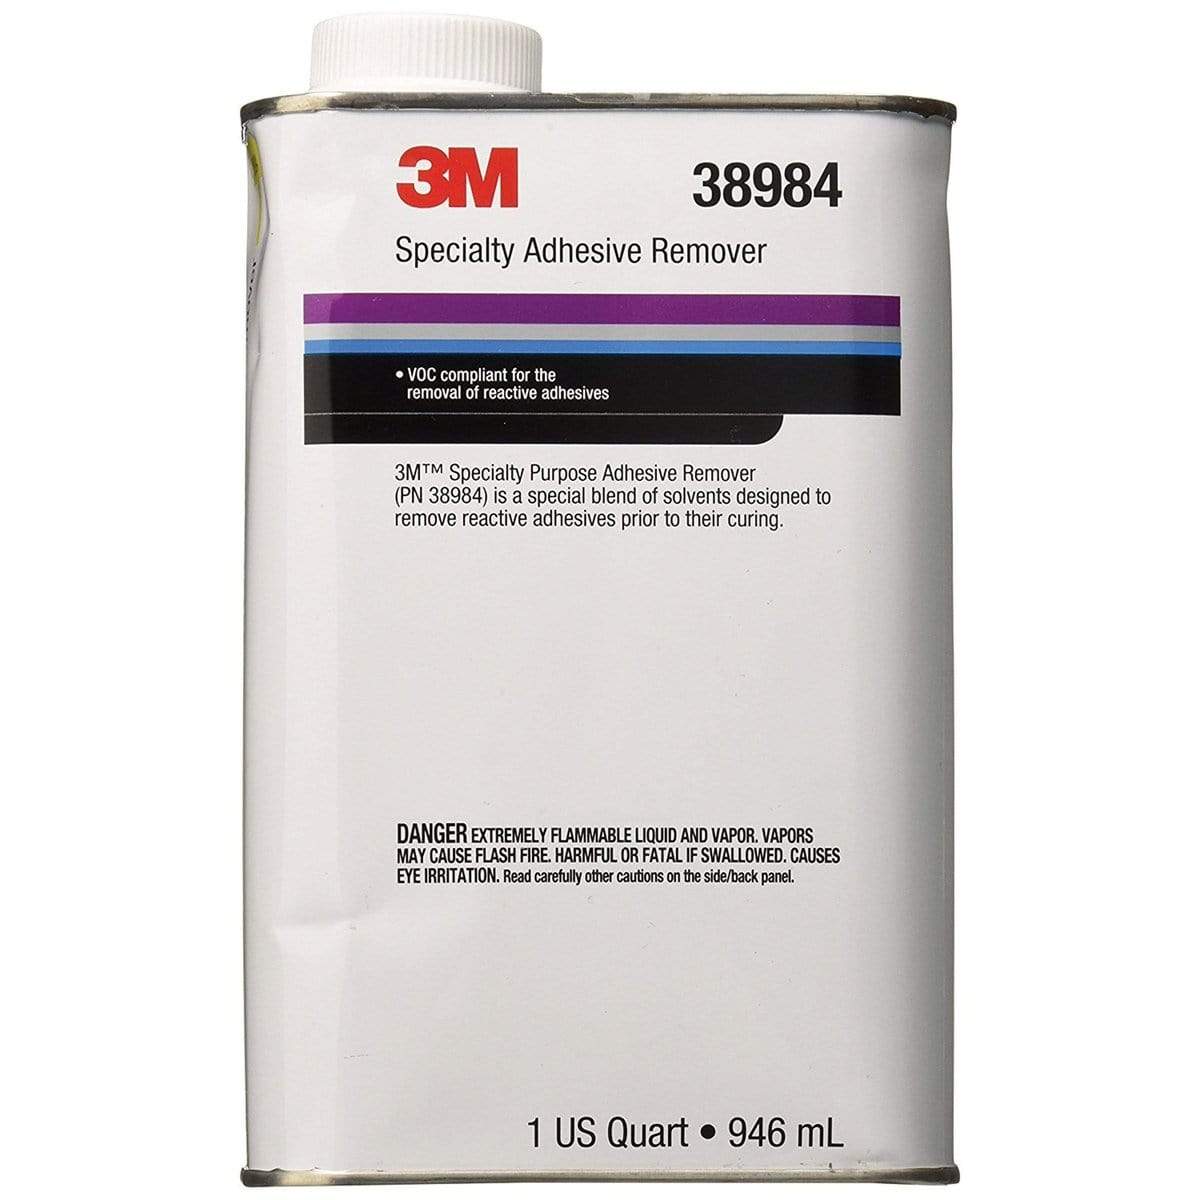 3M Marine Qualifies for Free Shipping 3M Specialty Adhesive Remover Quart #38984